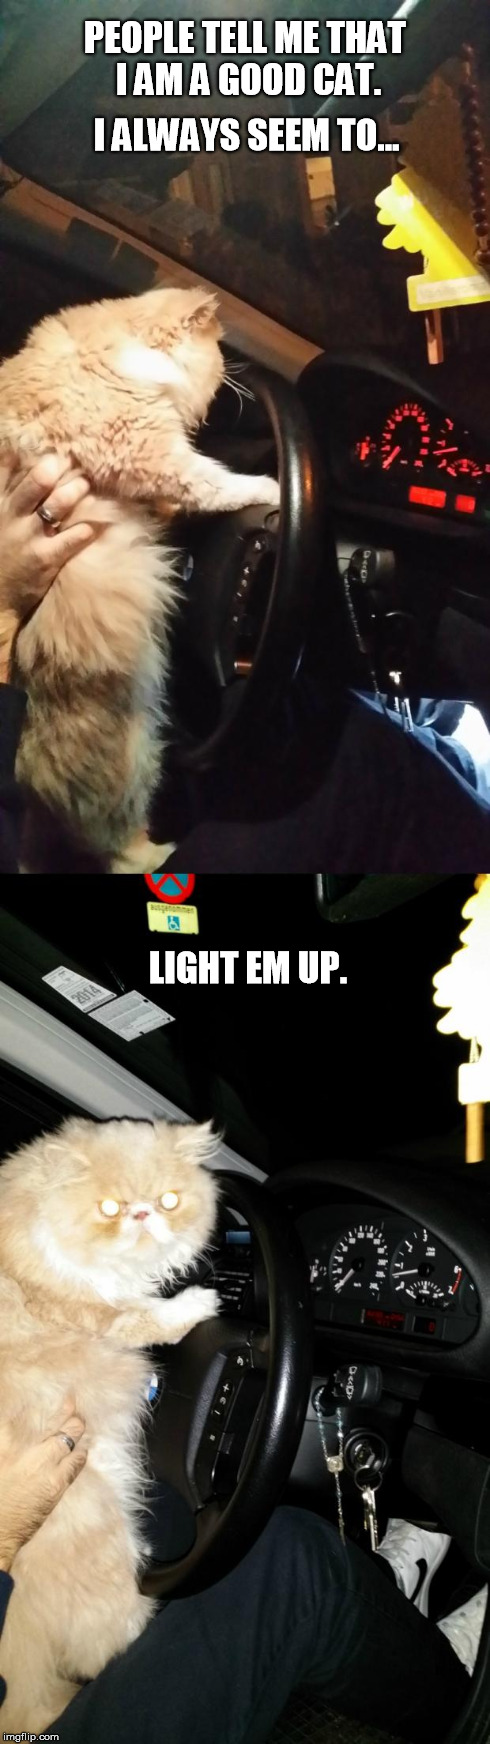 PEOPLE TELL ME THAT I AM A GOOD CAT. LIGHT EM UP. I ALWAYS SEEM TO... | image tagged in driving cat | made w/ Imgflip meme maker